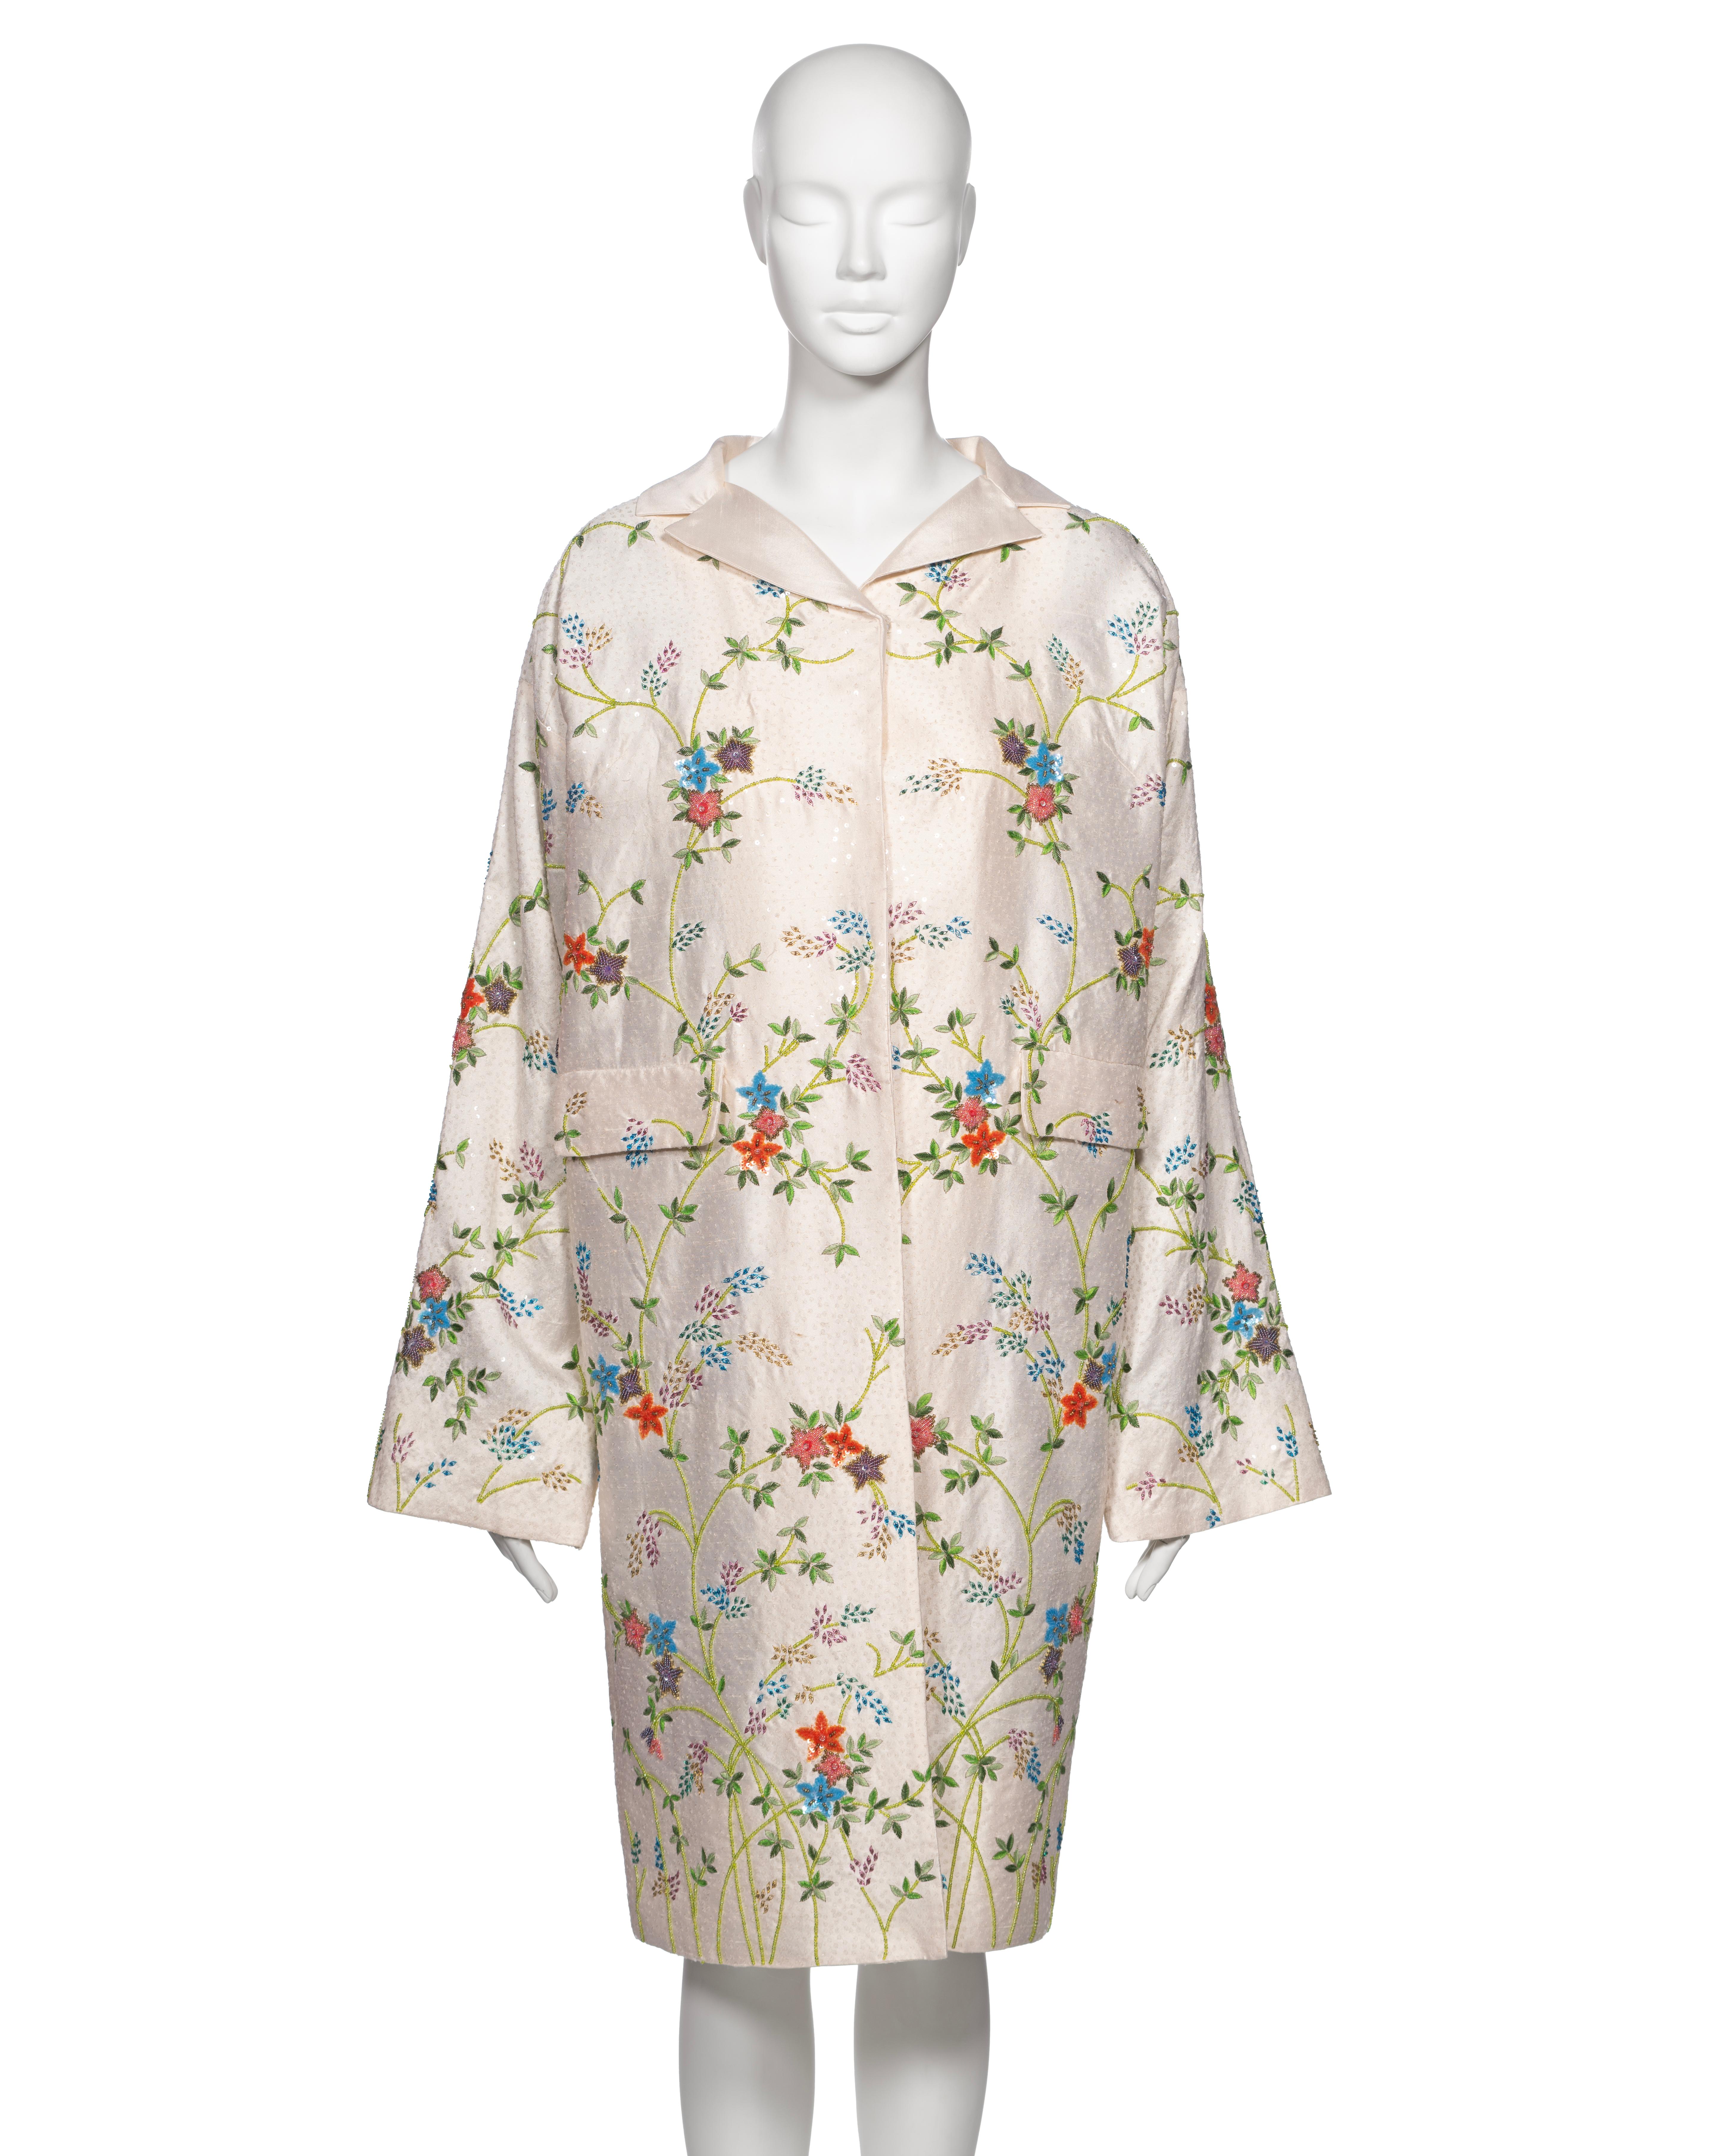 ▪ Archival Dolce & Gabbana Evening Coat
▪ Creative Director: Domenico Dolce and Stefano Gabbana 
▪ Spring-Summer 1997
▪ Crafted from high-quality white raw silk, this garment boasts exquisite craftsmanship
▪ Intricately hand-embroidered with micro